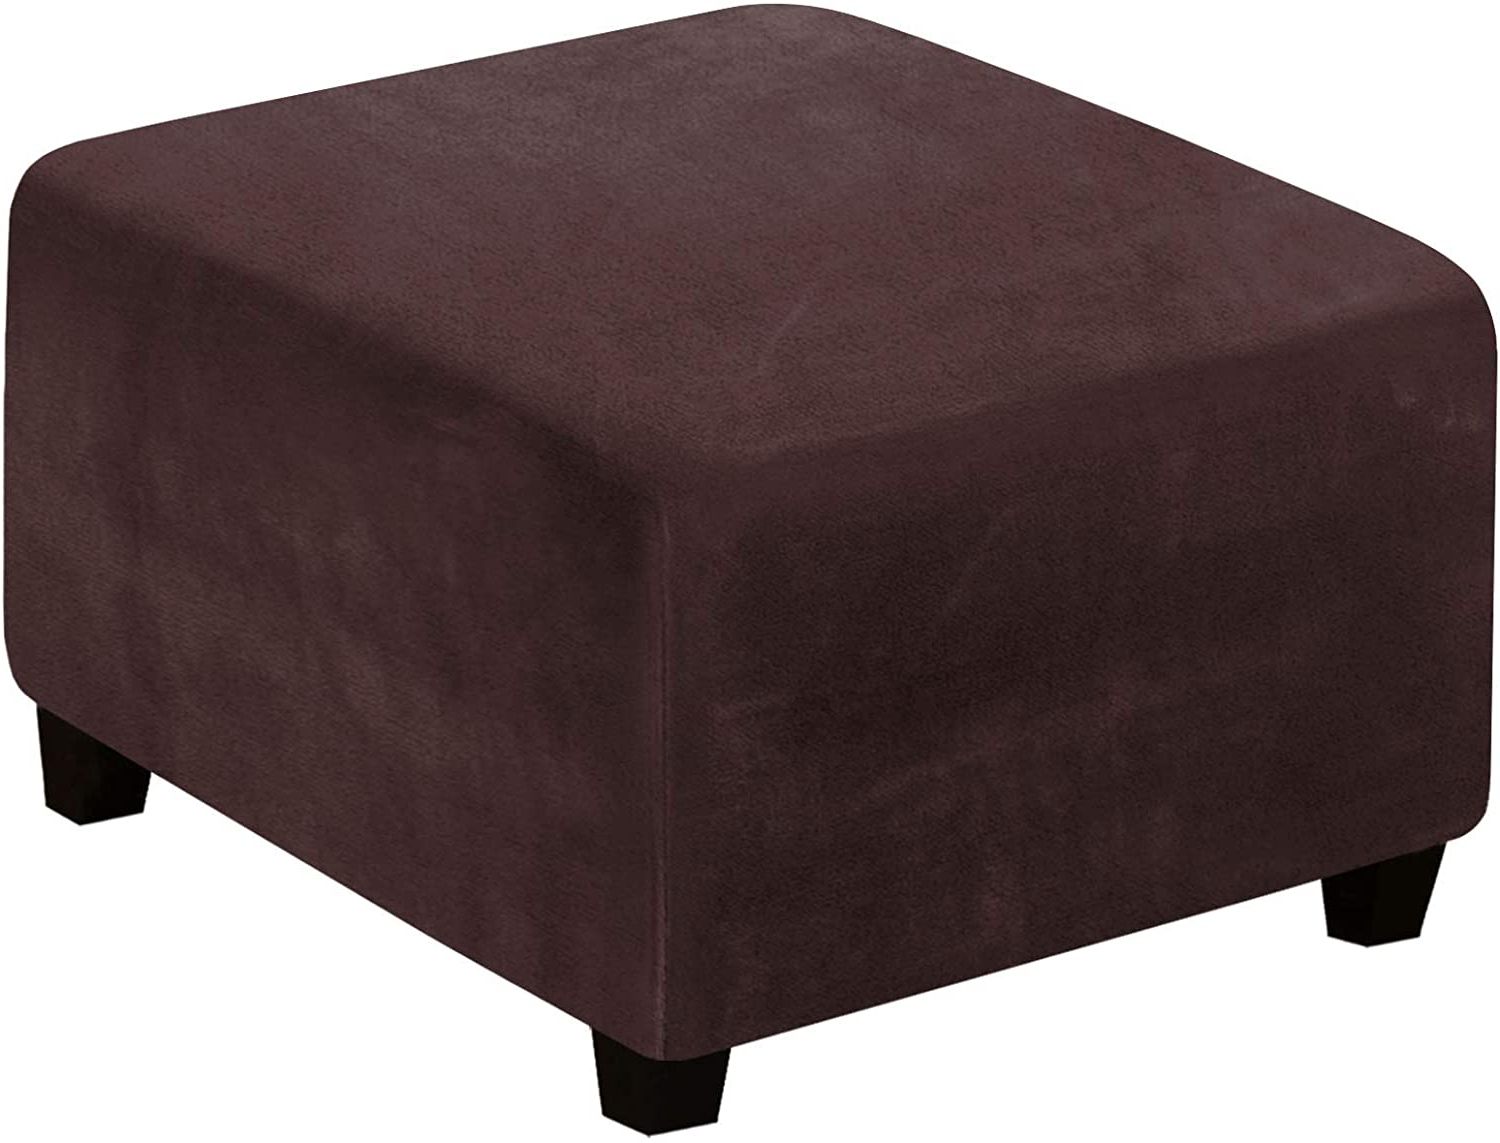 Square Ottoman Covers Ottoman Slipcover Square Footstool Protector With Most Up To Date Velvet Pleated Square Ottomans (View 1 of 10)